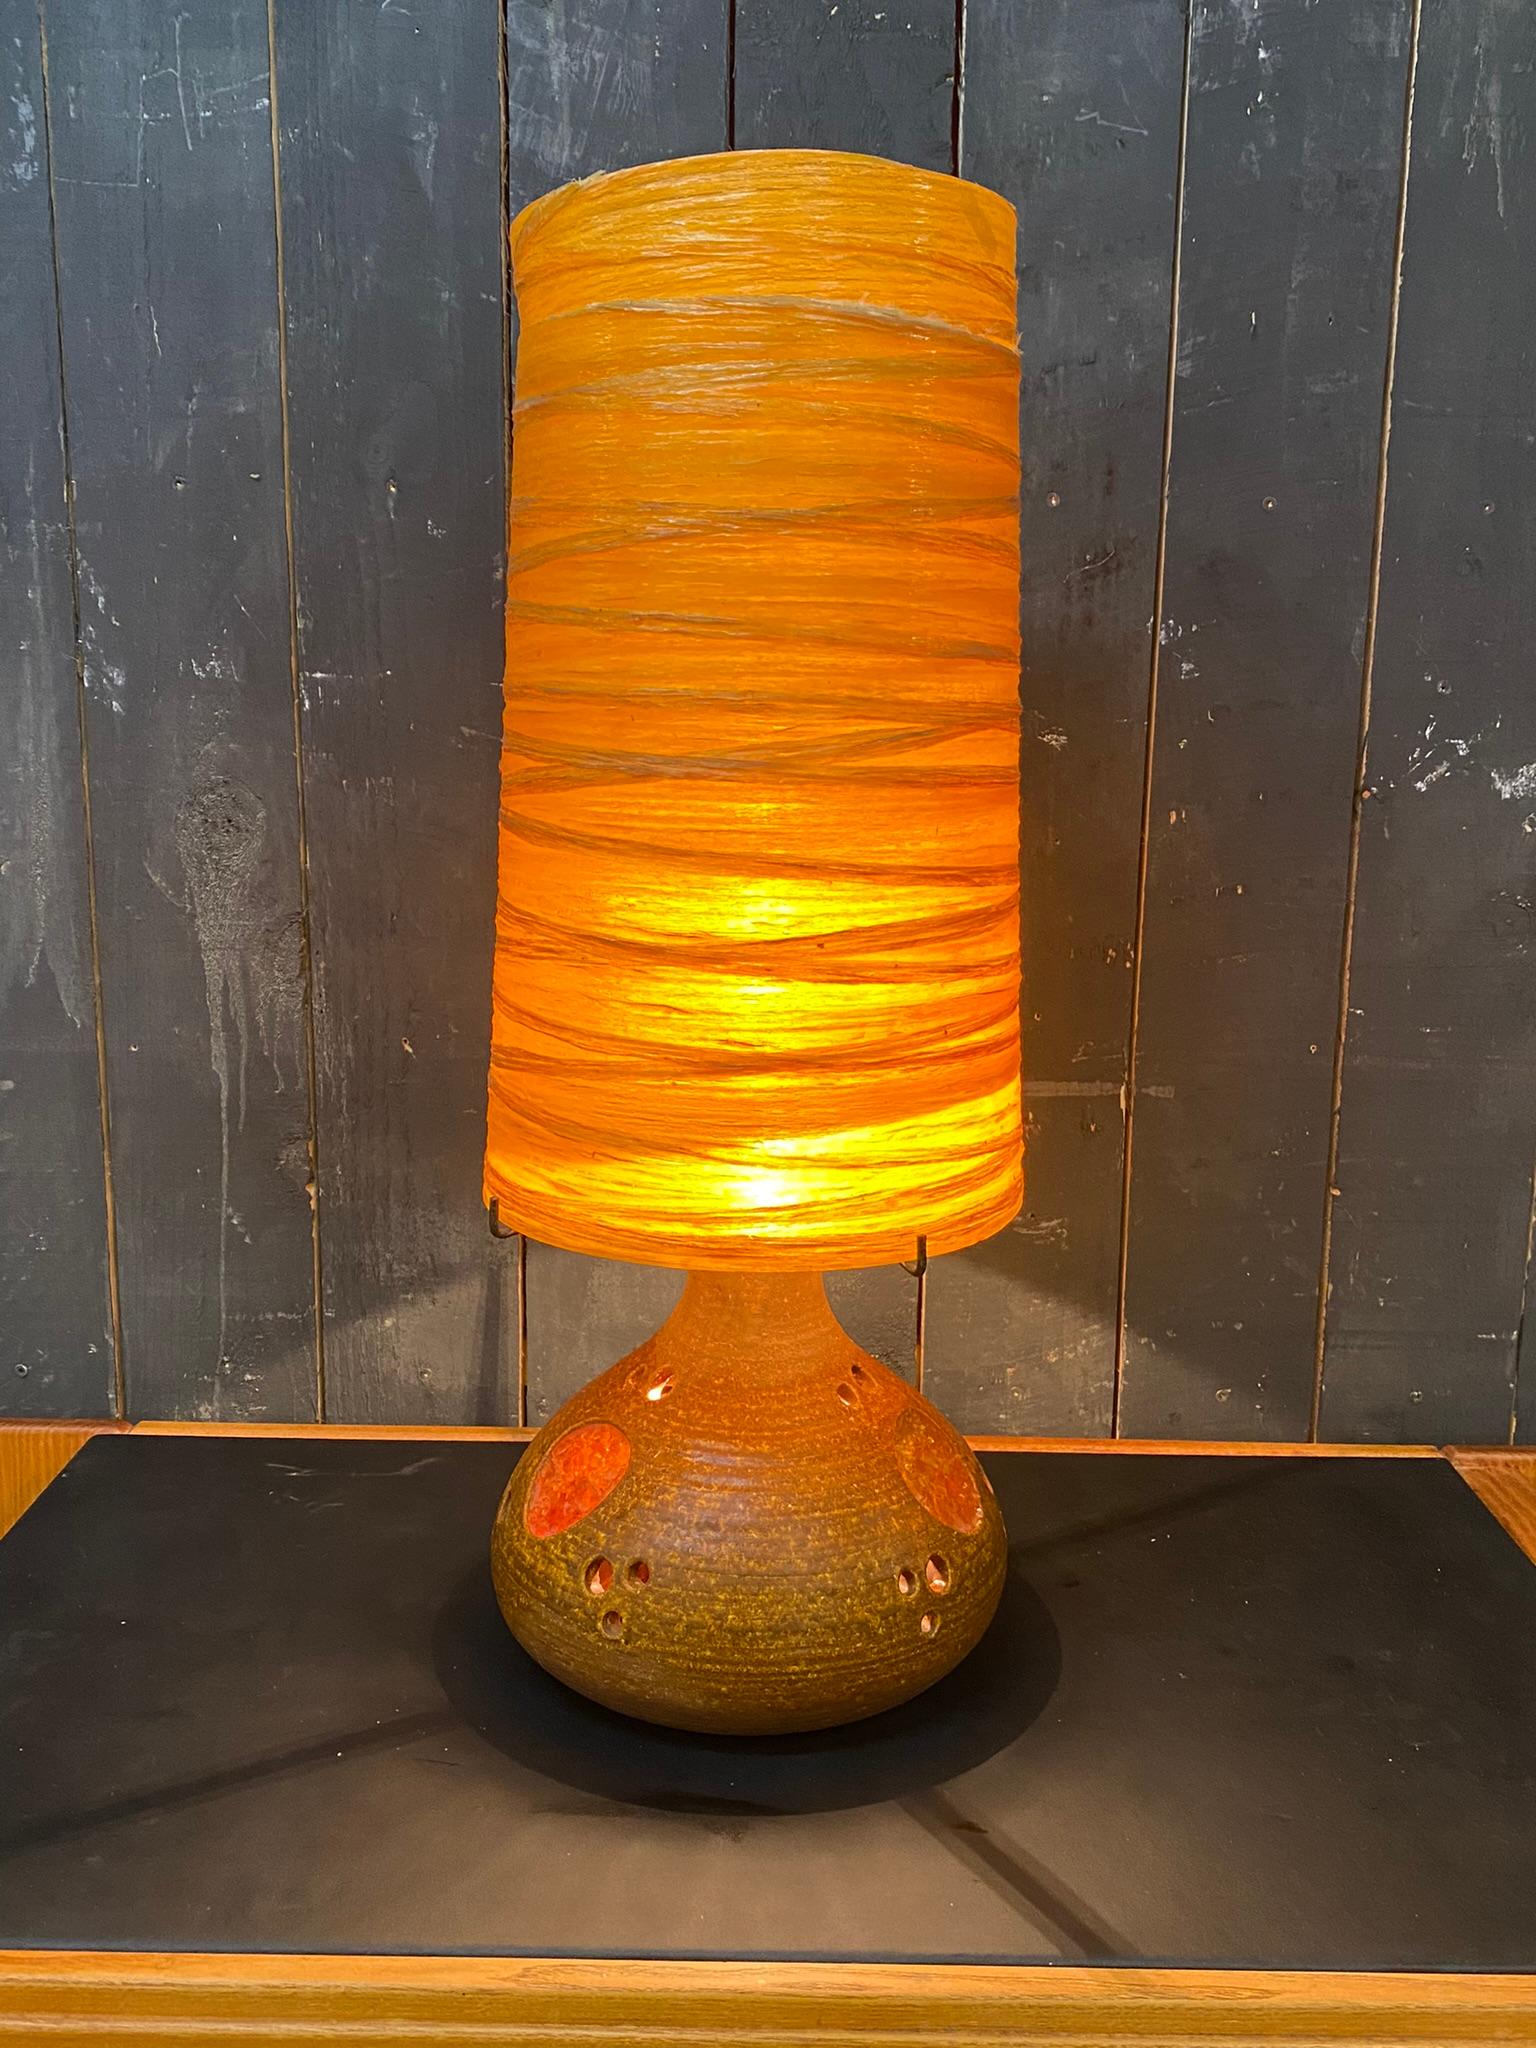 Terracotta lamp and its original lampshade in colored resin.
also with interior lighting diffused by pieces of colored glass
attributed to Accolay.